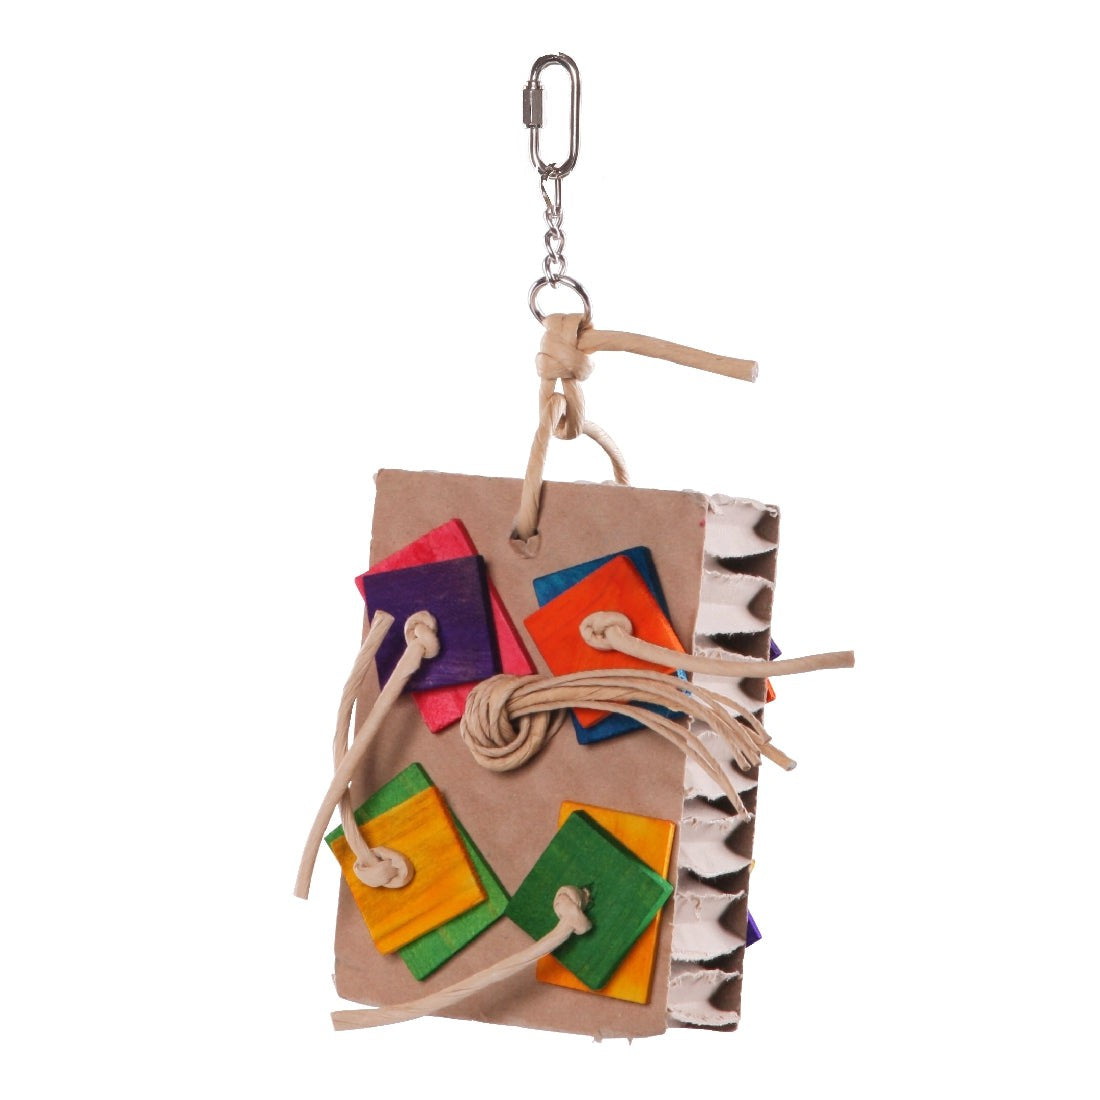 Colorful hanging bird toy with blocks and cardboard on white background.